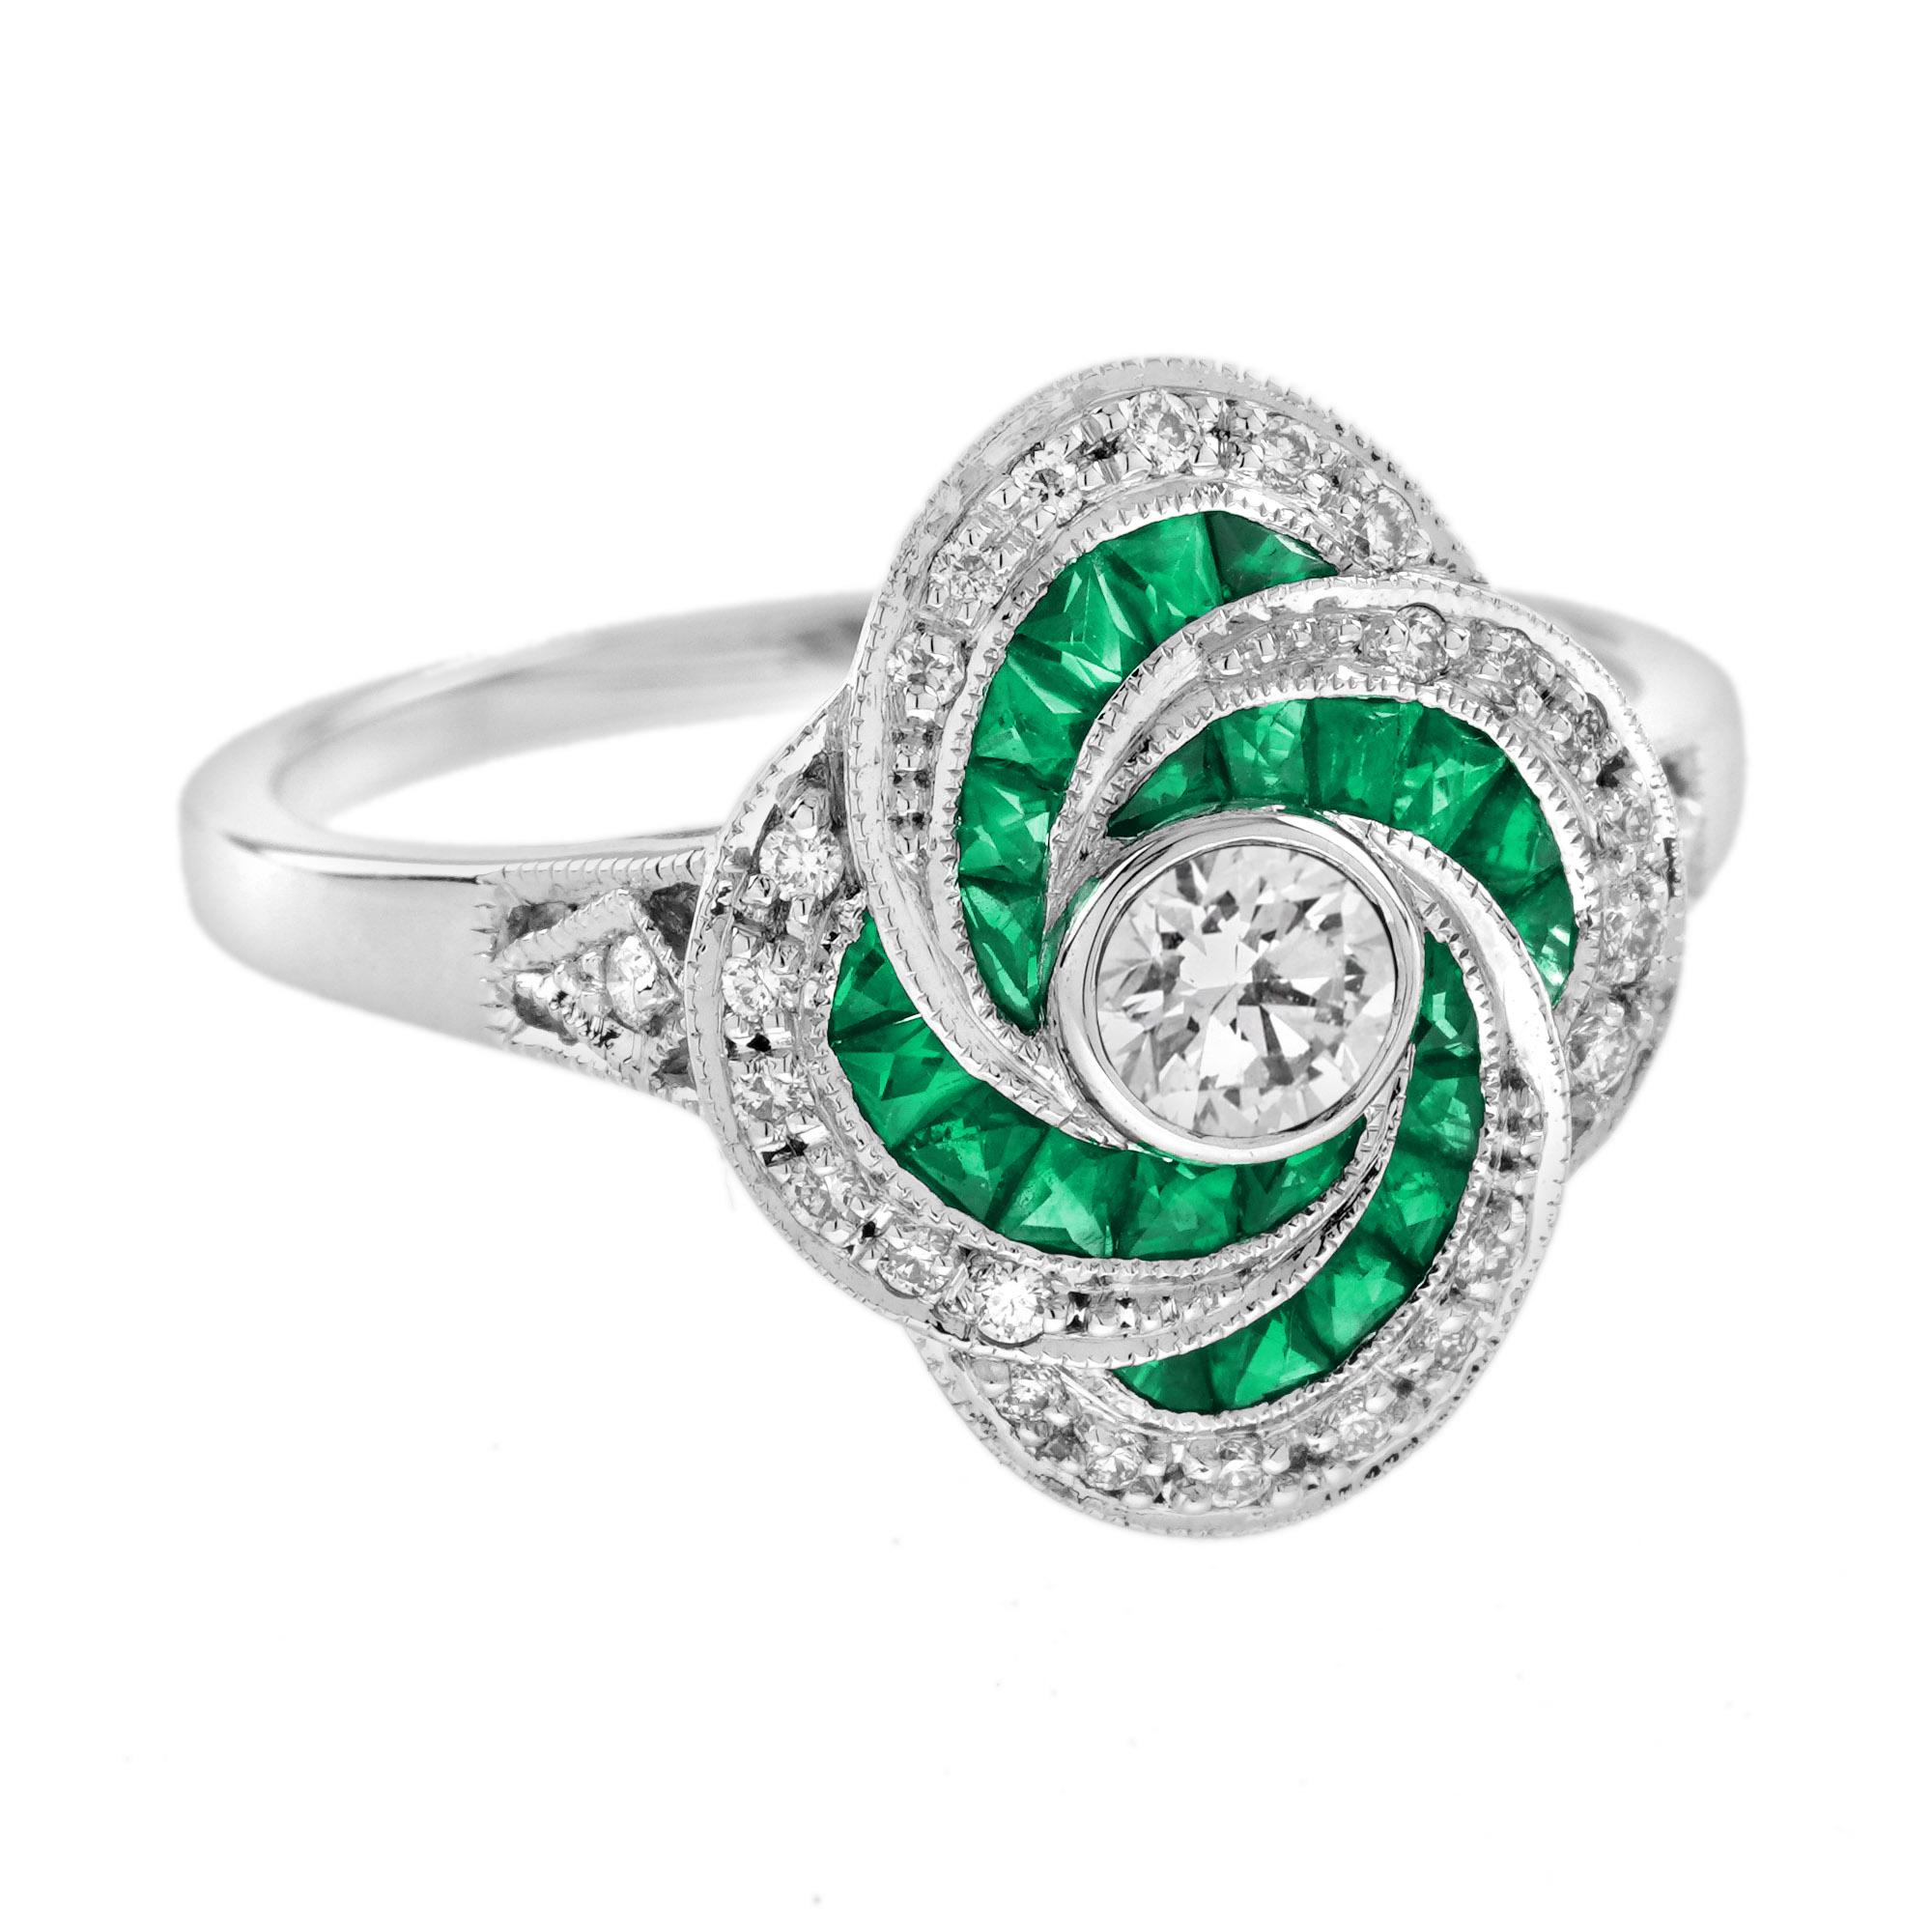 Round Cut Diamond and Emerald Art Deco Style Swirling Engagement Ring in 18K White Gold For Sale